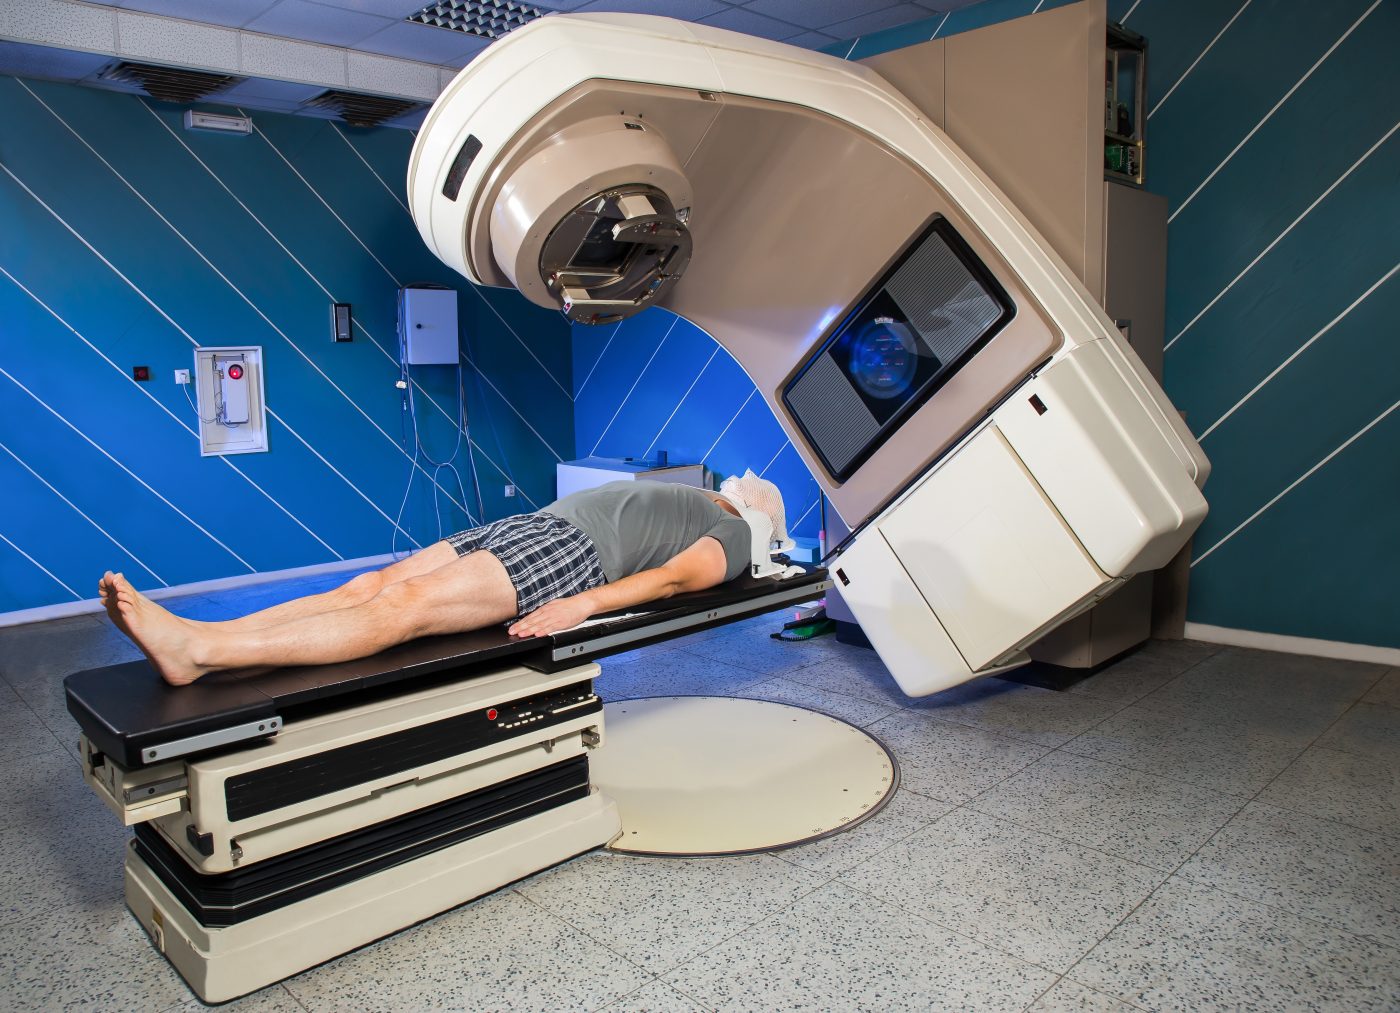 New Prostate Cancer Radiotherapy Course Shows Less Side Effects, Treatment Time, Cost